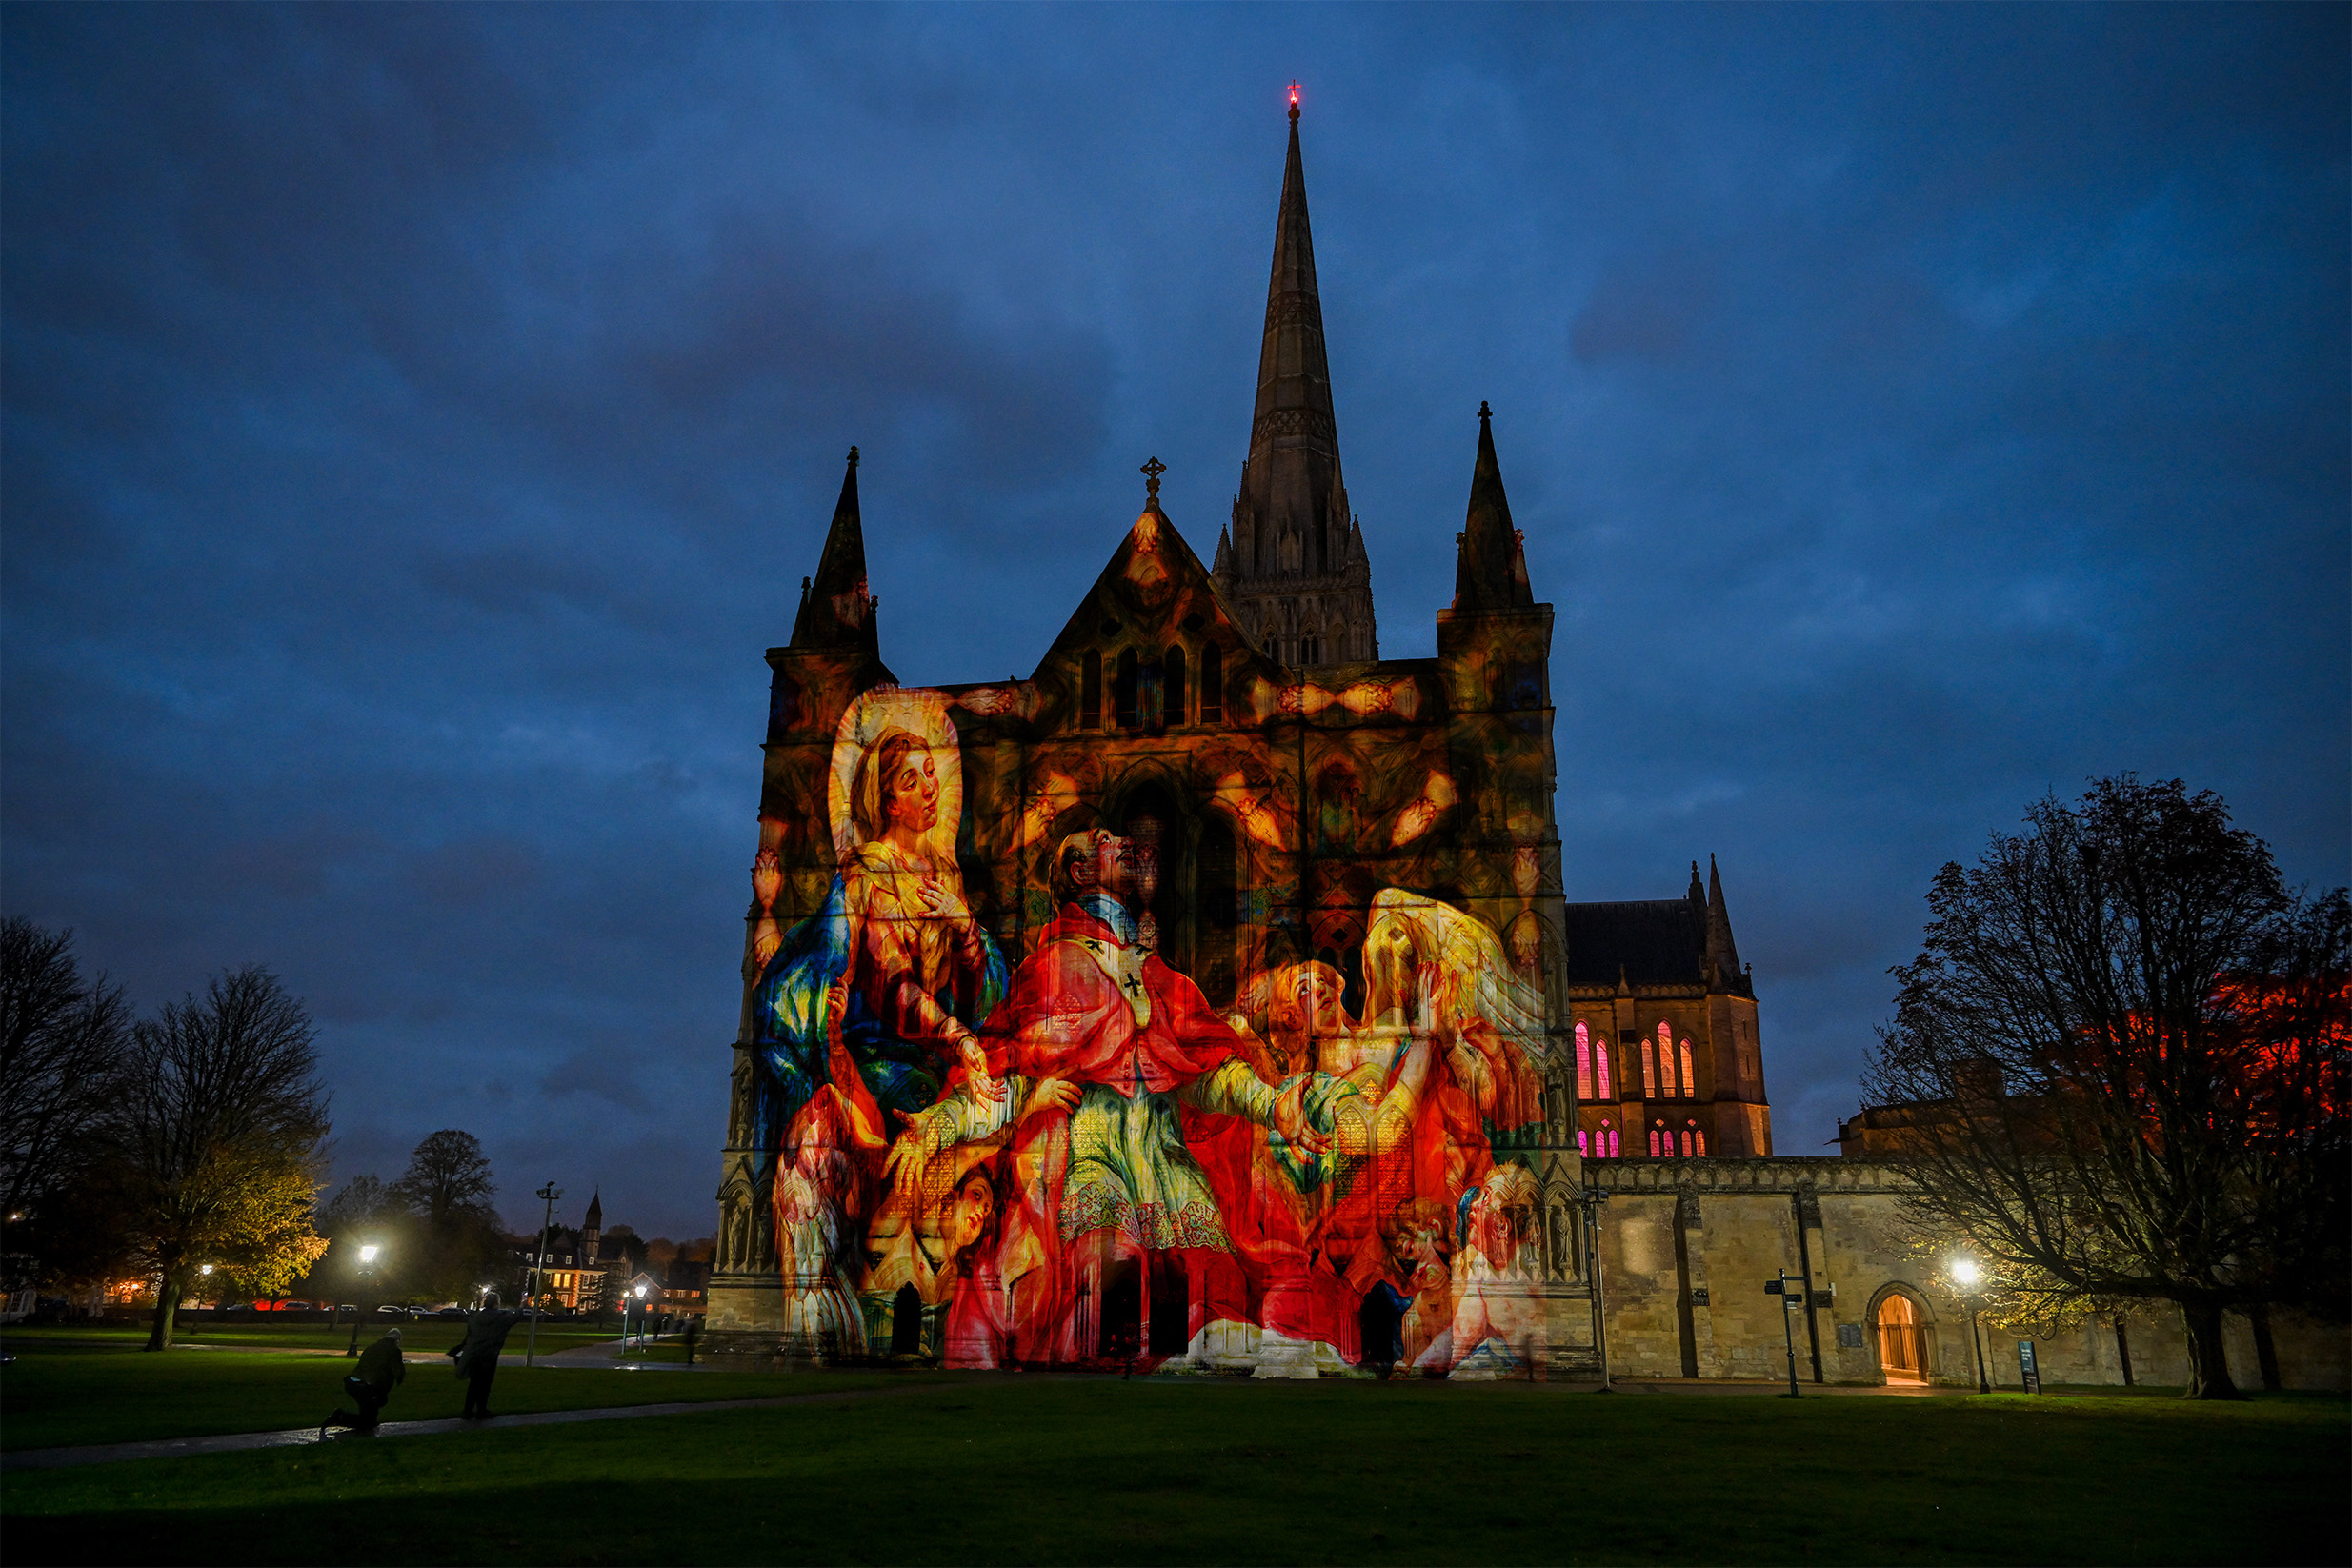 Colourful images projected on the outside facade of Salisbury Cathedral